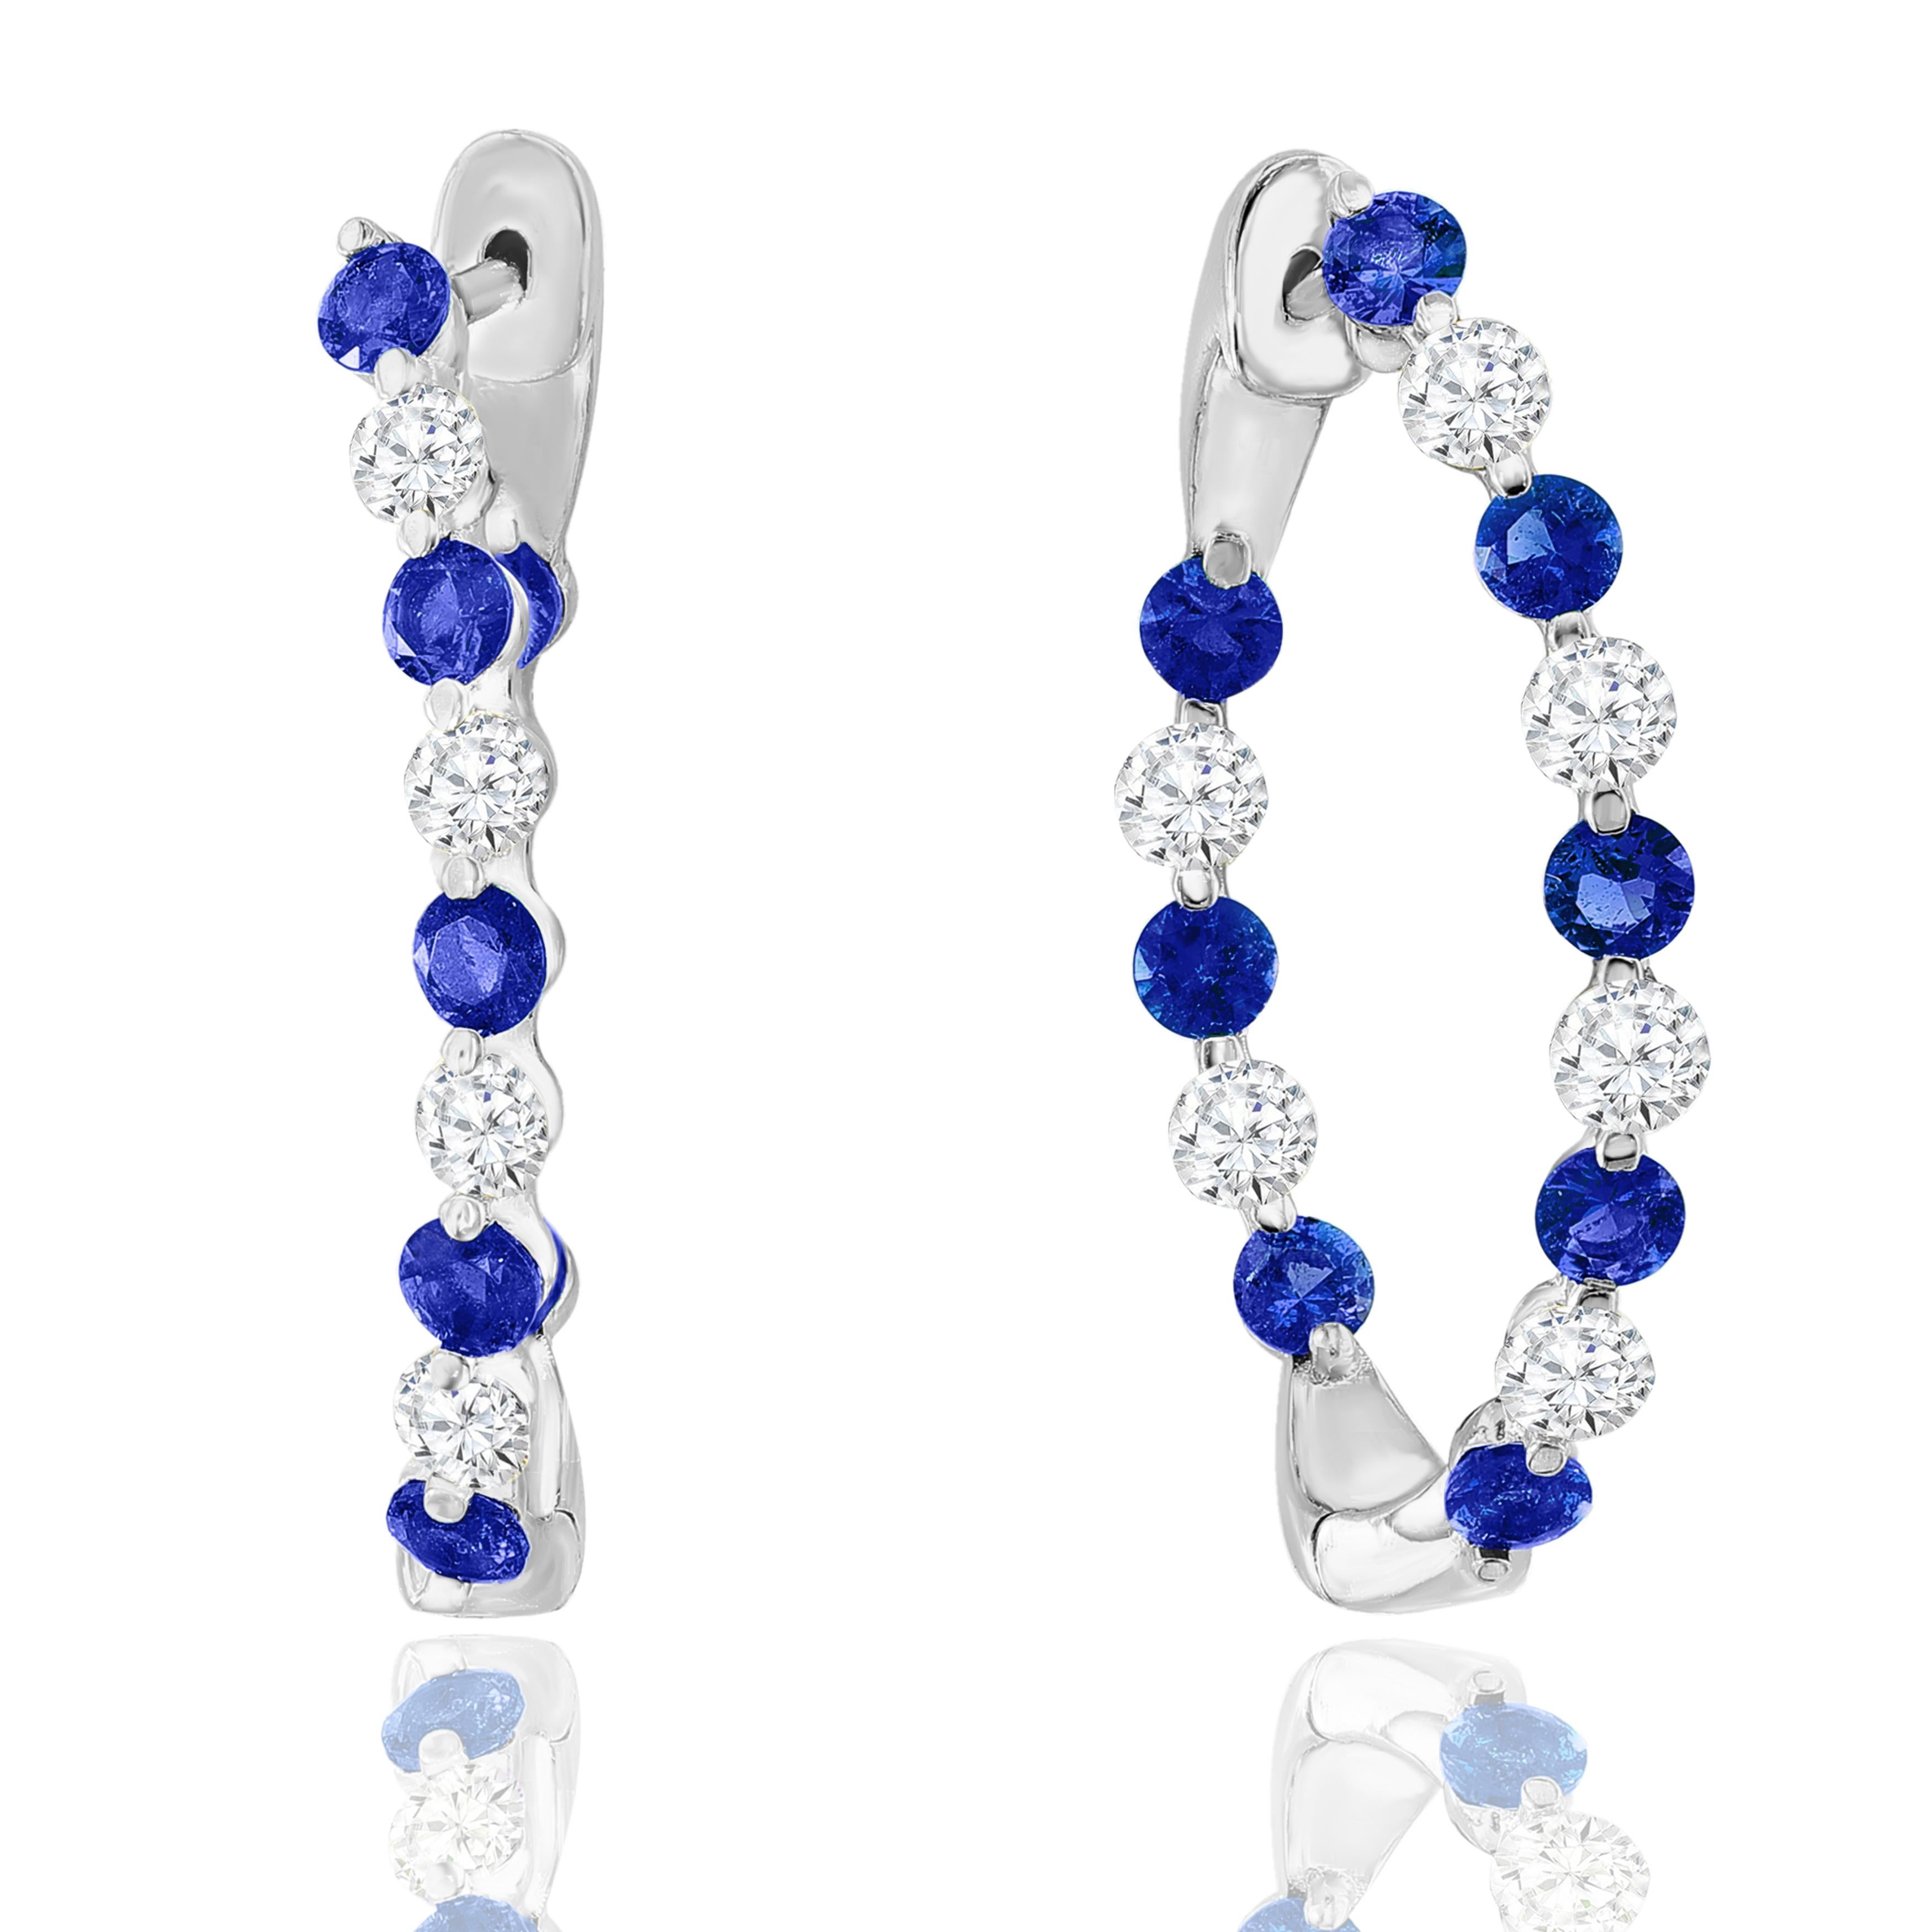 A chic and fashionable pair of hoop earrings showcasing brilliant-cut 16-round Blue Sapphires alternating with diamonds, set in 14k white gold. 12 Round diamonds weigh 1.15 carats in total and 16 Blue Sapphires weigh 2 carats in total. A beautiful